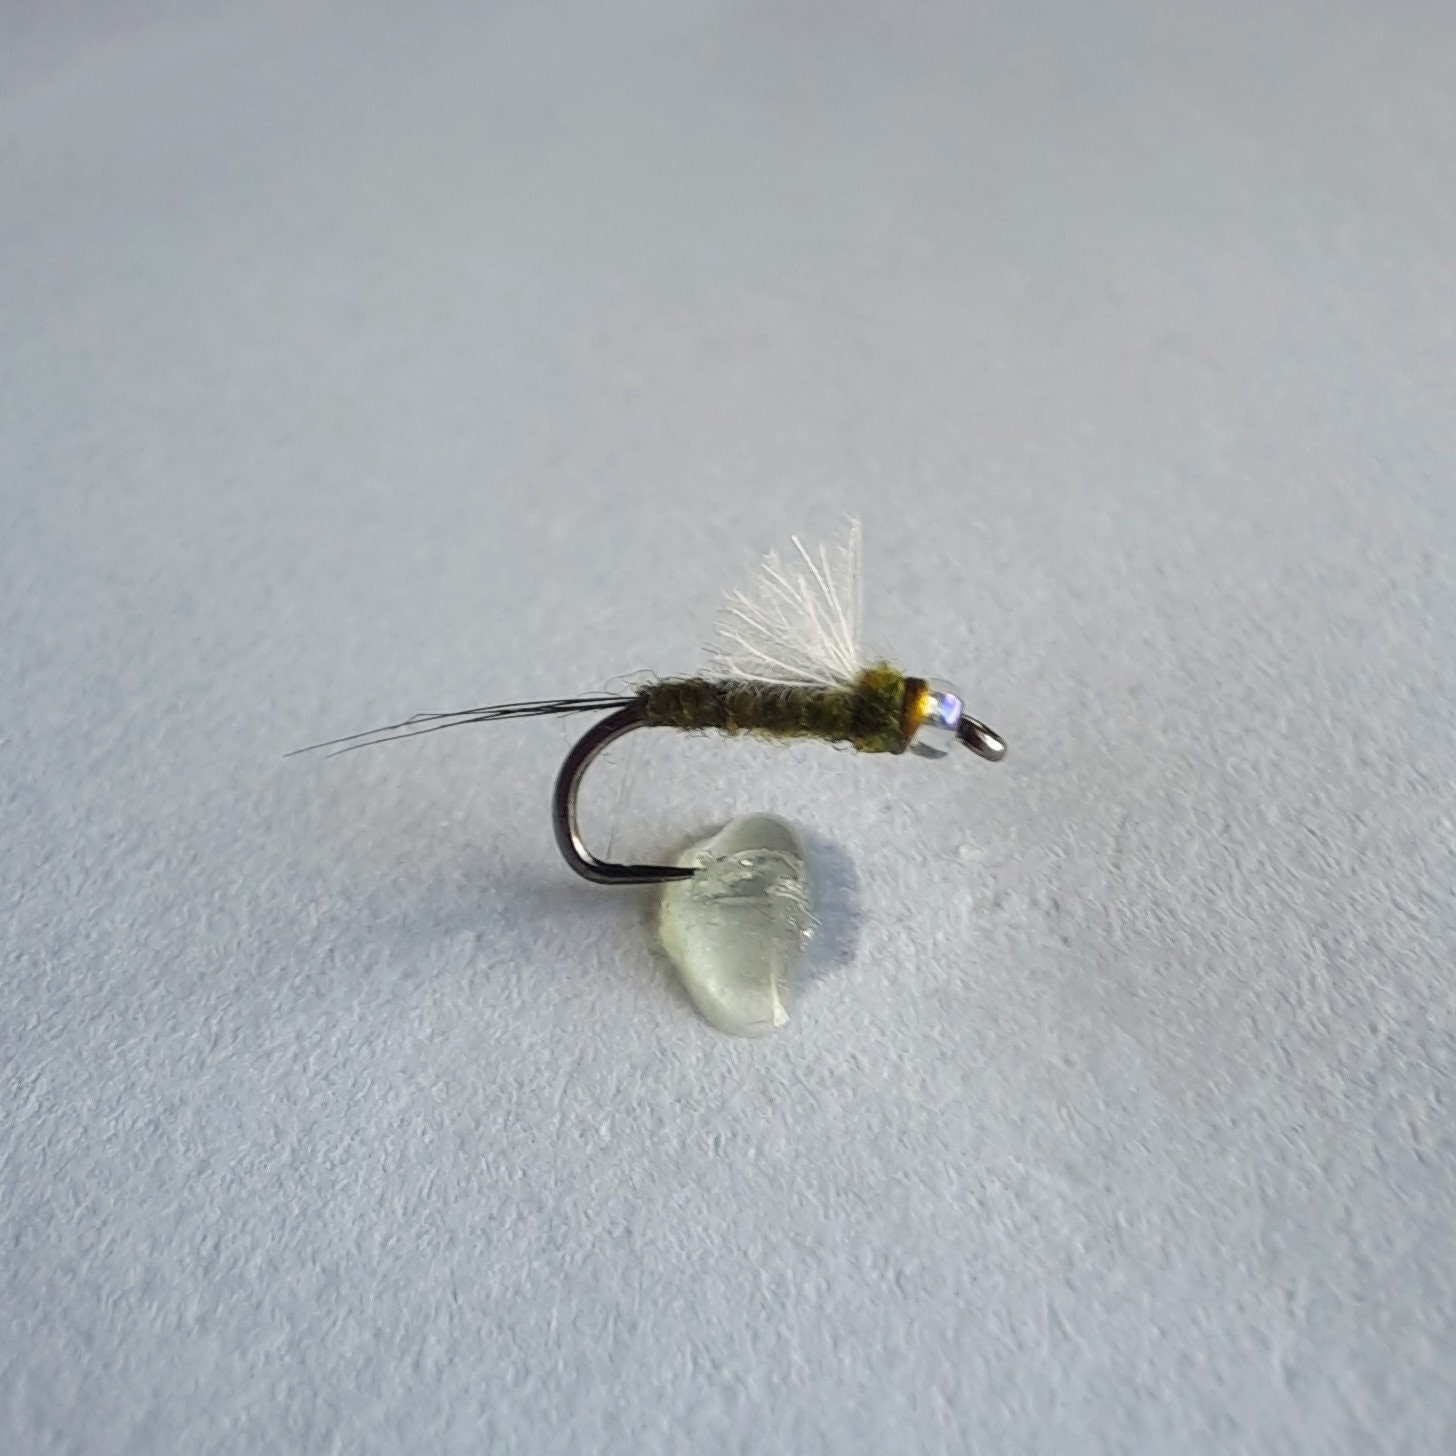 Buy 12 RS2 Fly Assortment Trout Assortments. Fly Fishing Flies. Trout  Flies. Nymphs. Colorado Trout Flies. Barbless. Sparkle Wing. Foam Wing  Online in India 